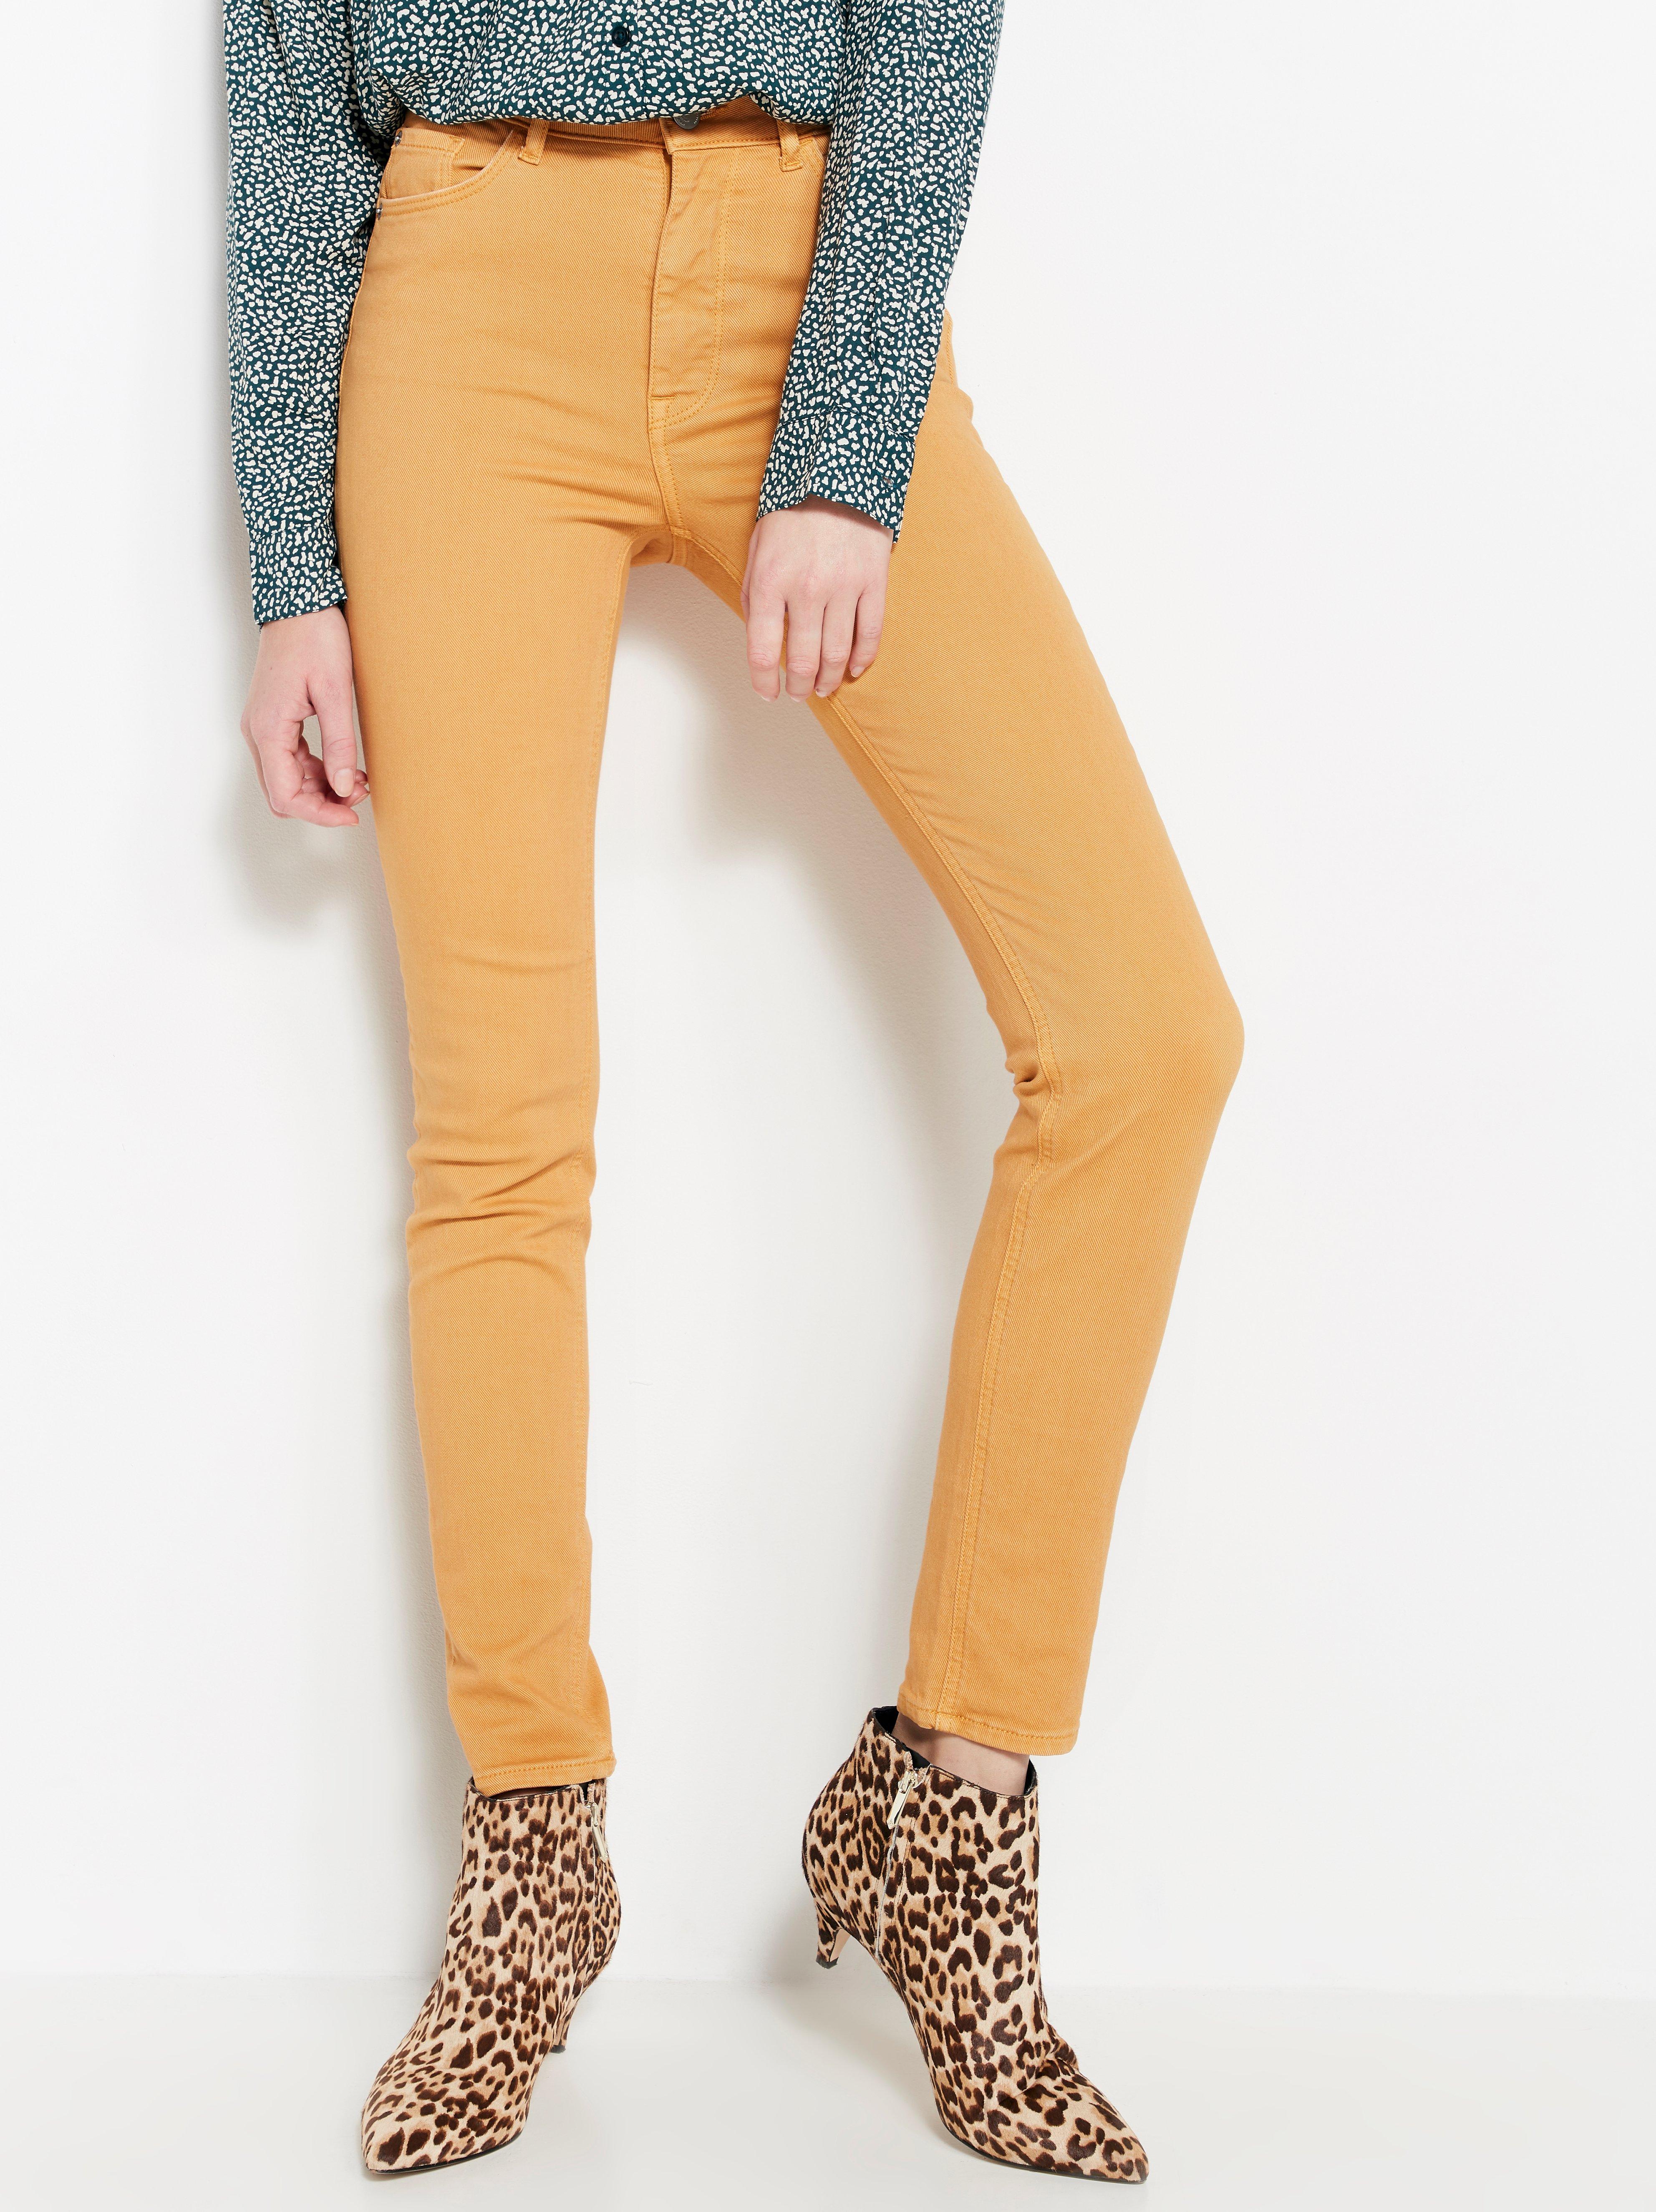 yellow high waisted jeans